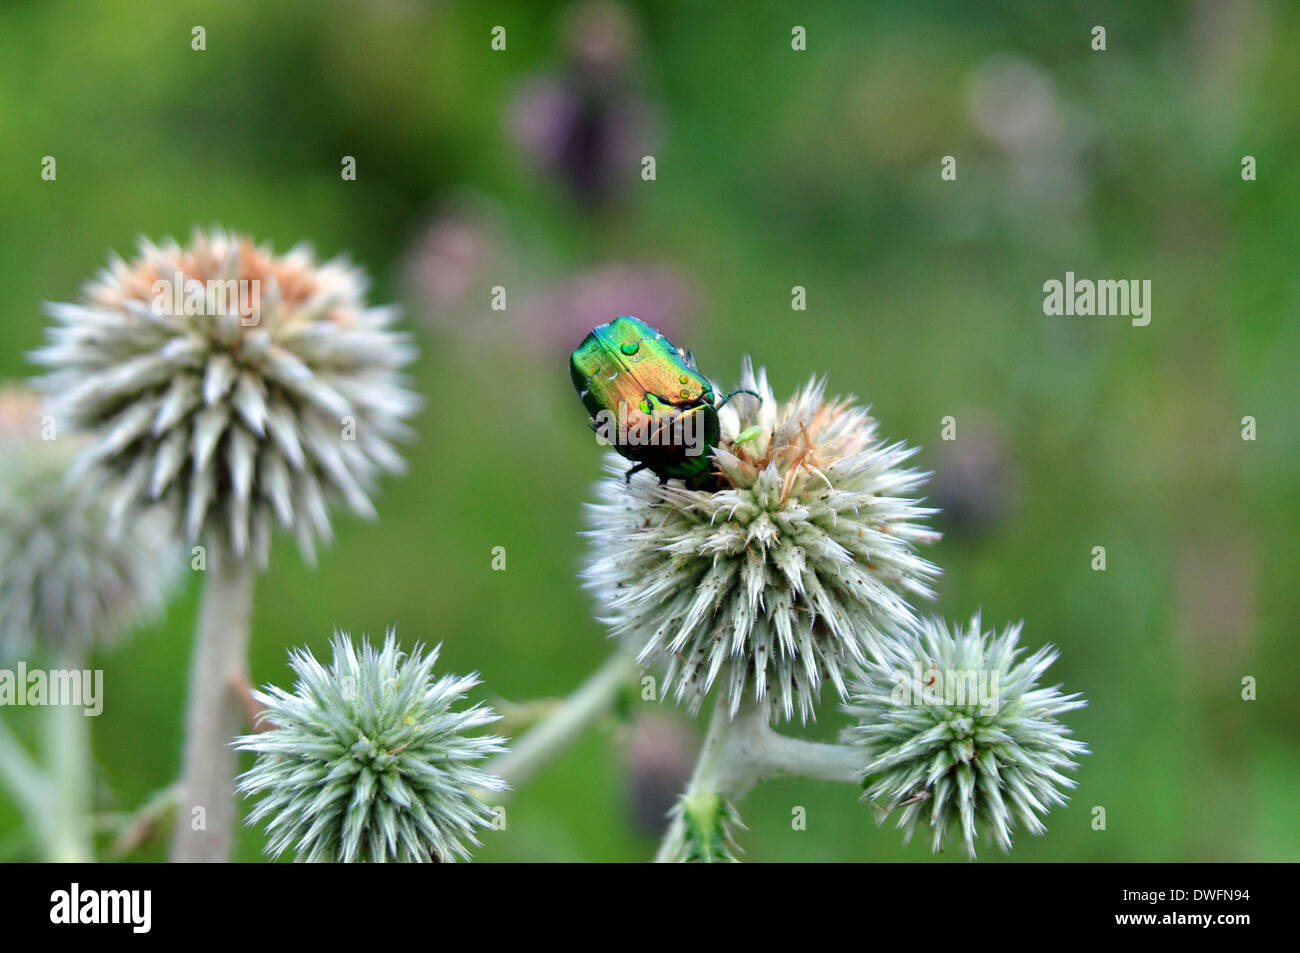 Chrysolina fastuosa . Insect beetle on the prickles Stock Photo